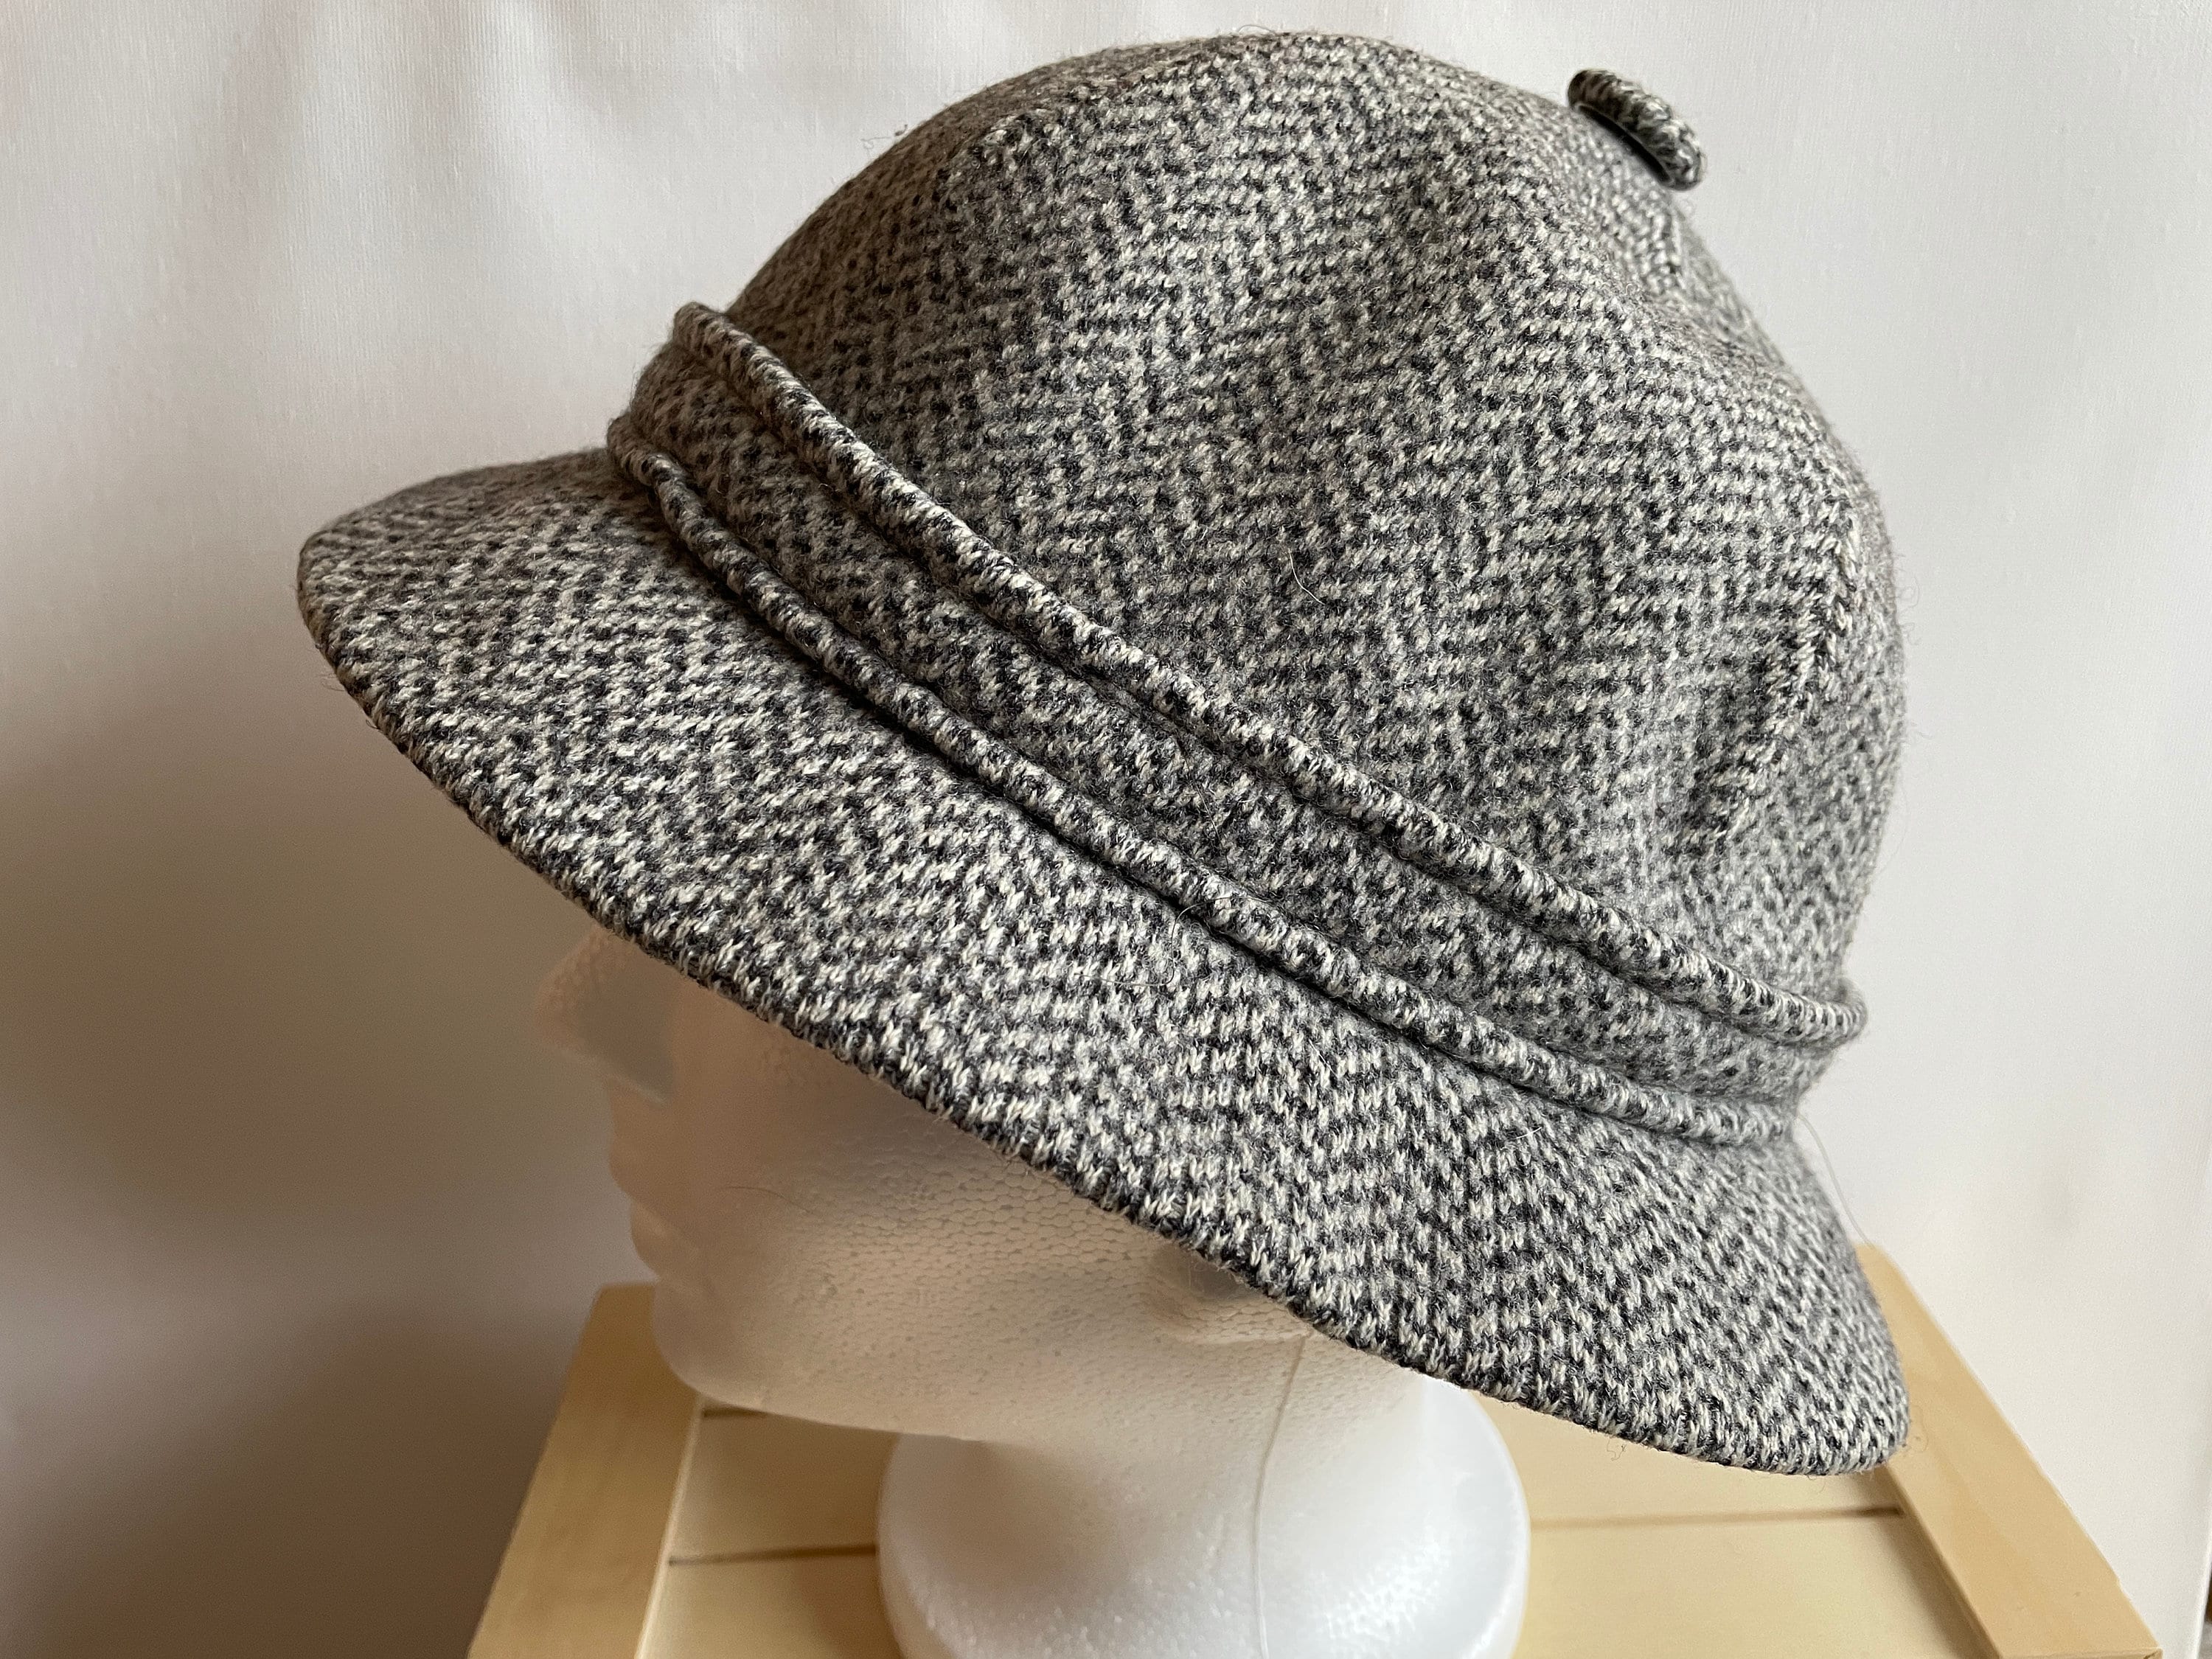 Vintage Hat Bands: Classic & Kangol Styles for Stylish Accessorizing